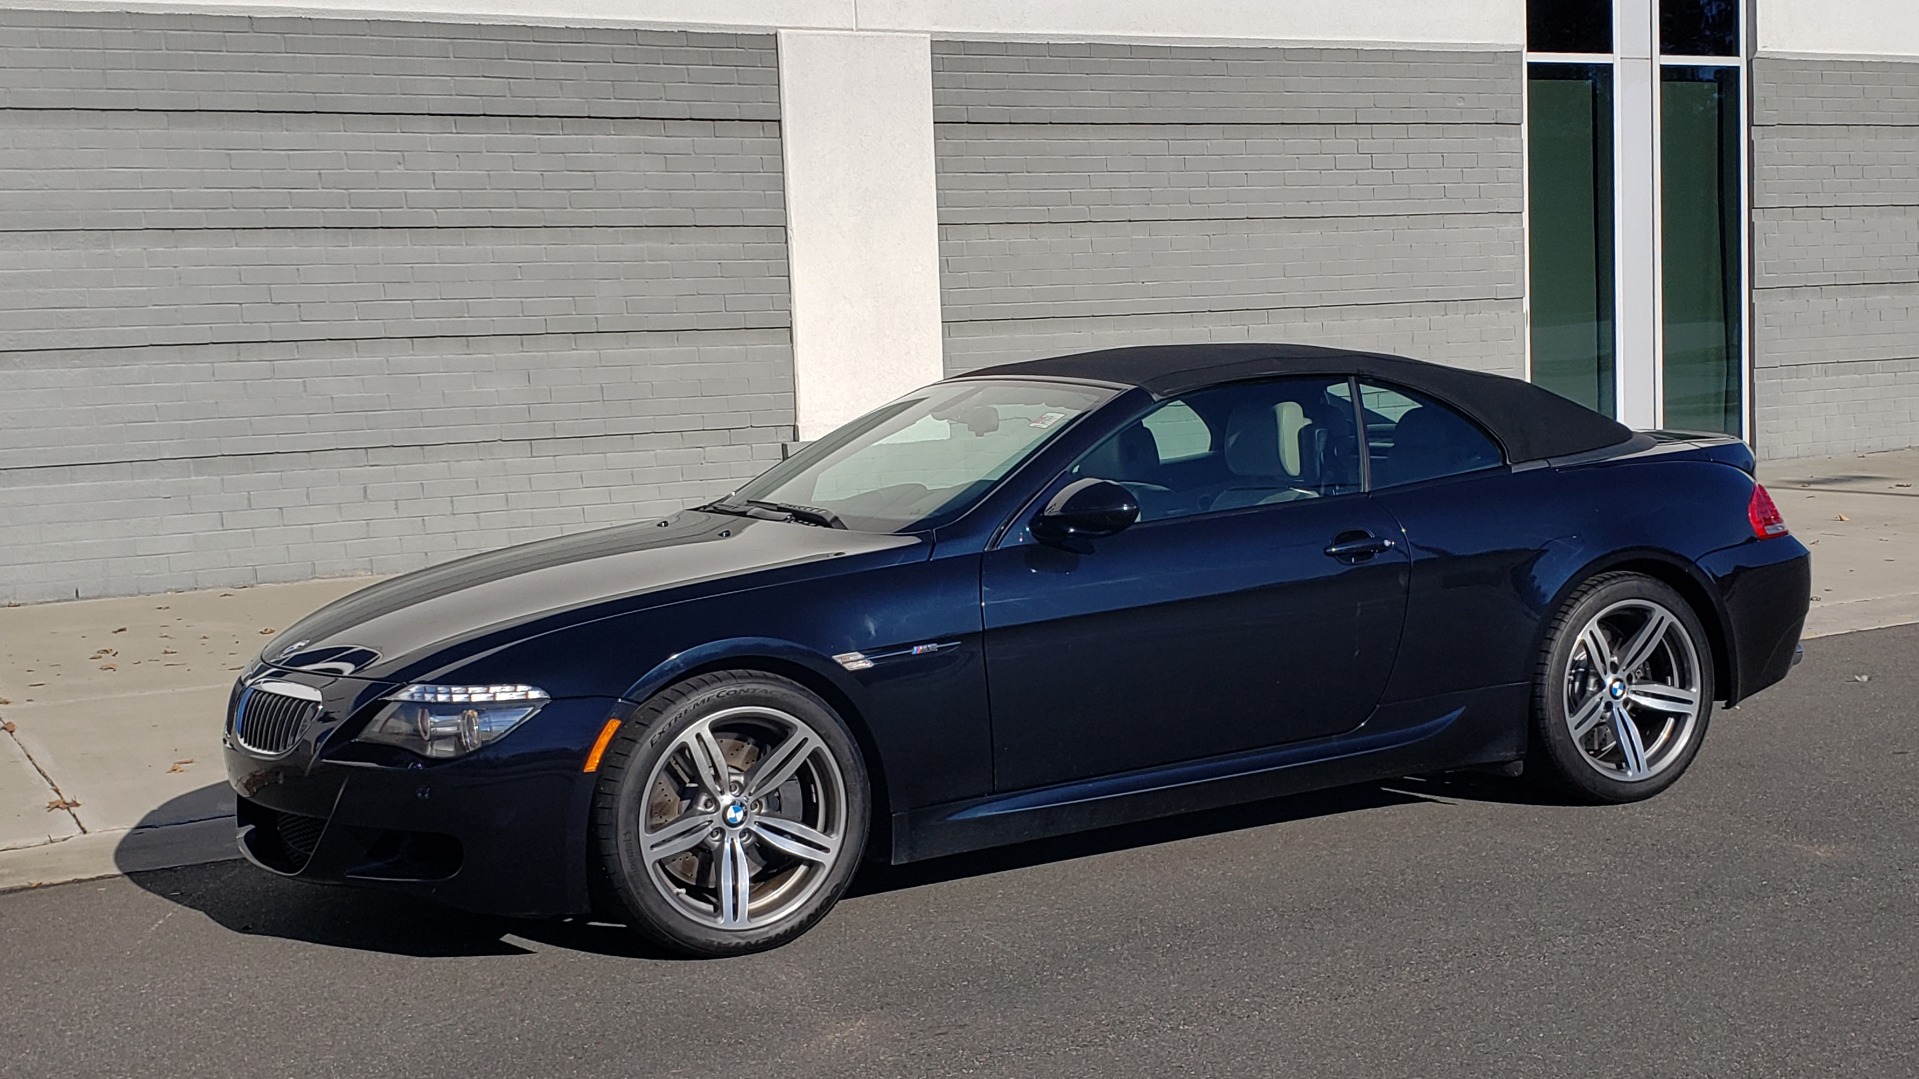 Used 2009 BMW M6 CONVERTIBLE / 5.0L V10 (500HP) / PREM SND / HUD / 19IN WHEELS for sale Sold at Formula Imports in Charlotte NC 28227 4